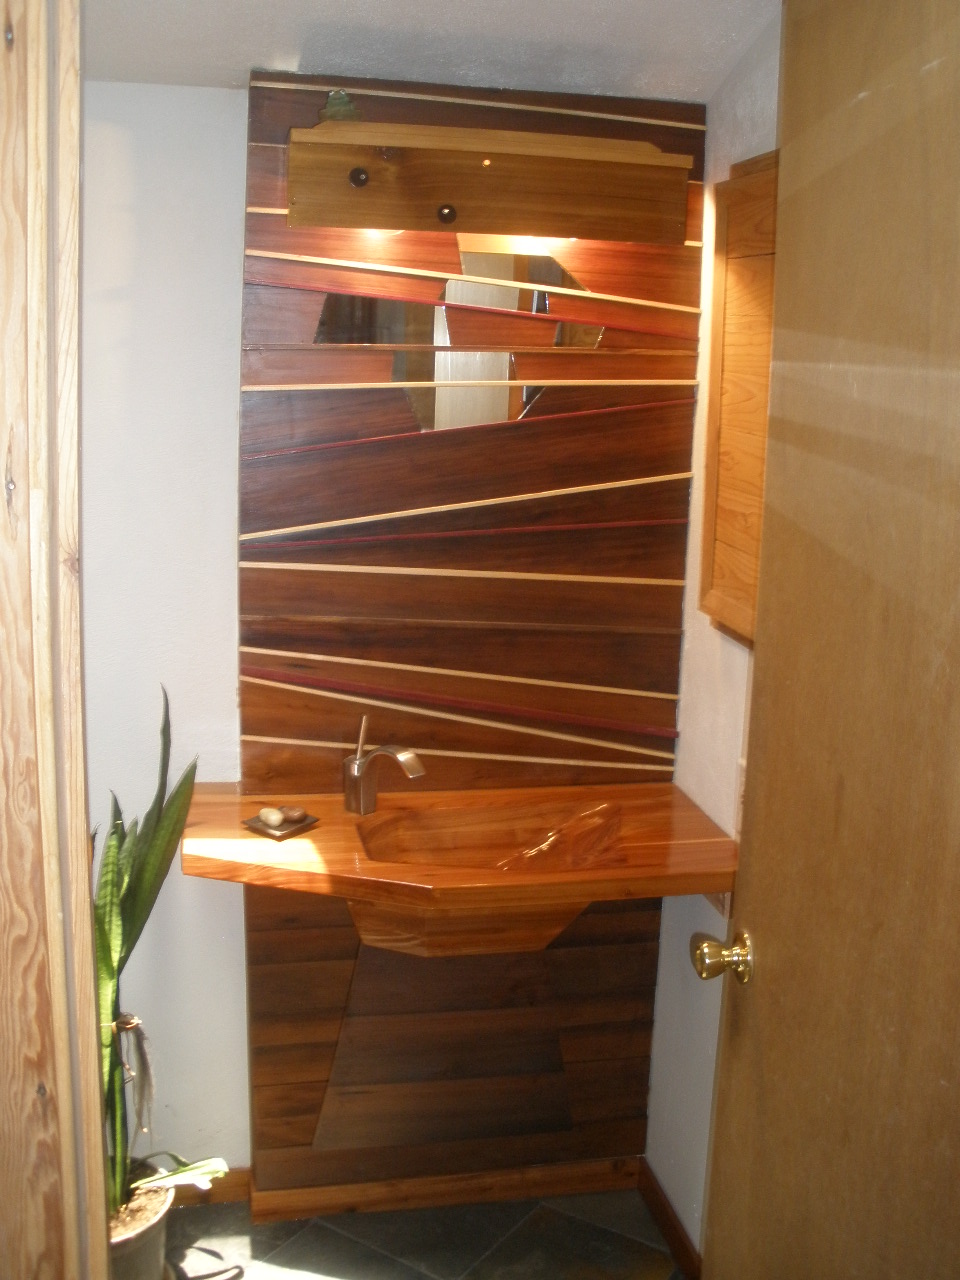 redwood sink and wall